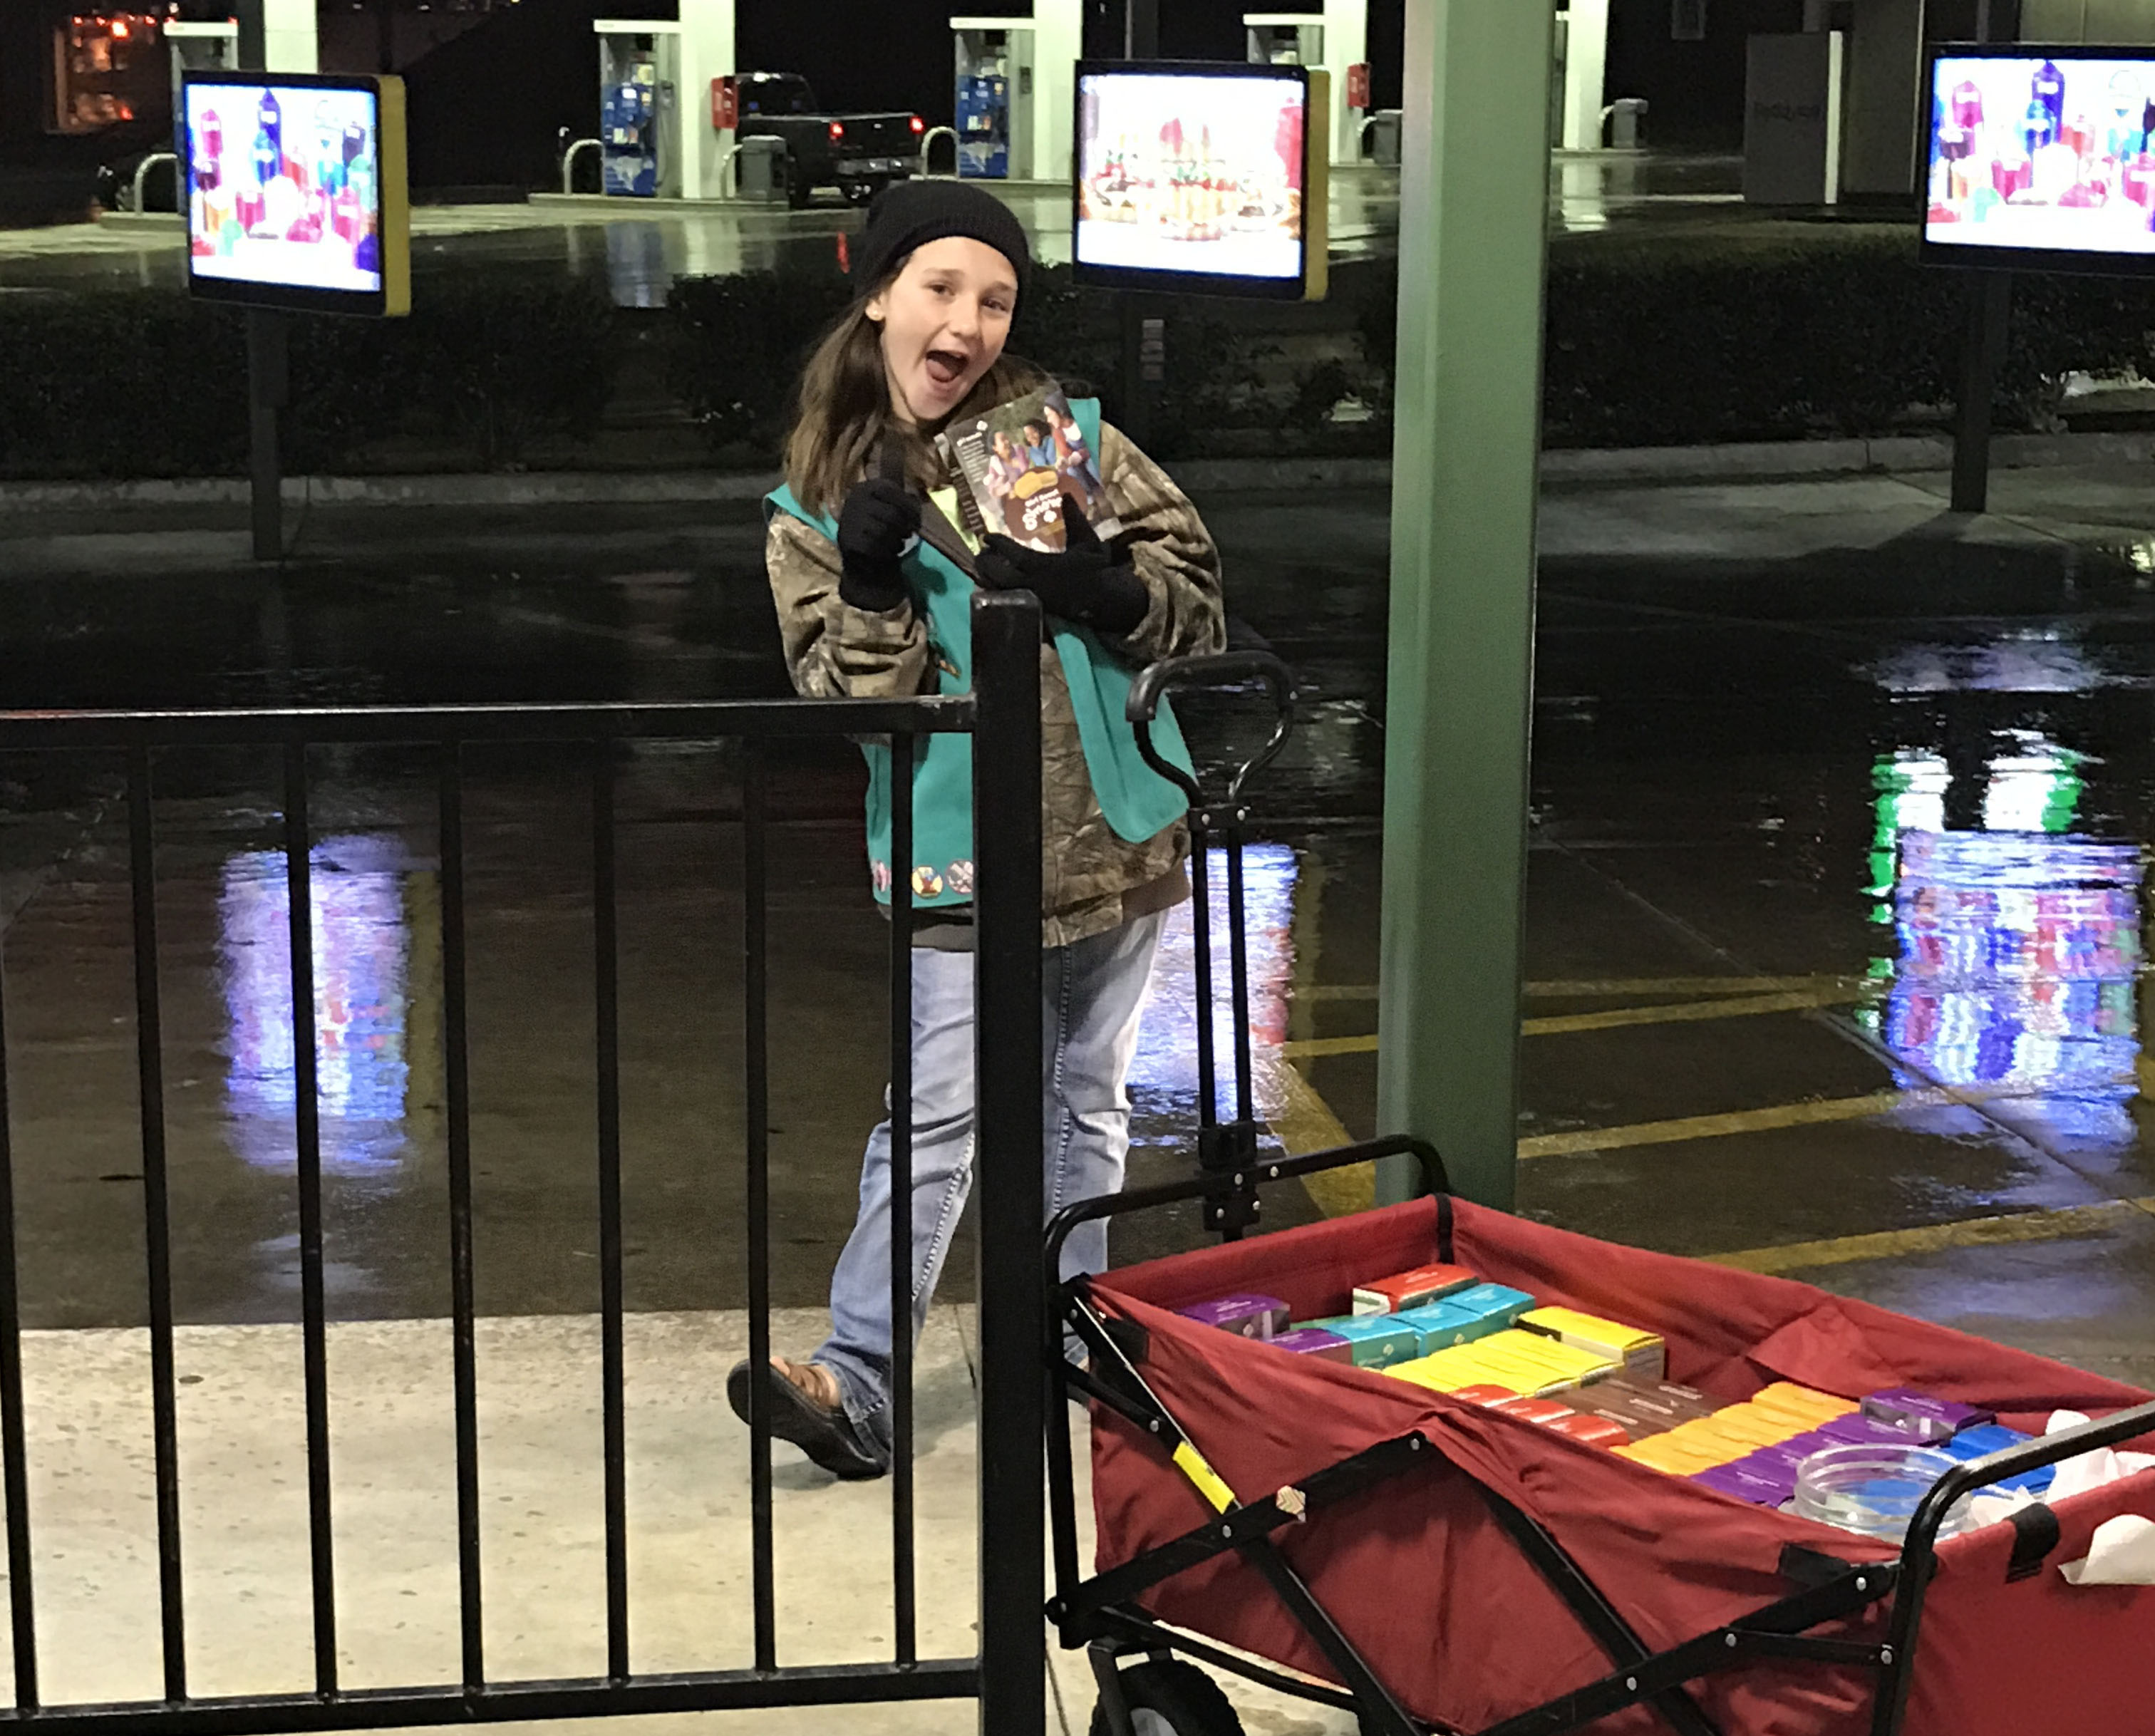 Selling Girl Scout Cookies in the rain